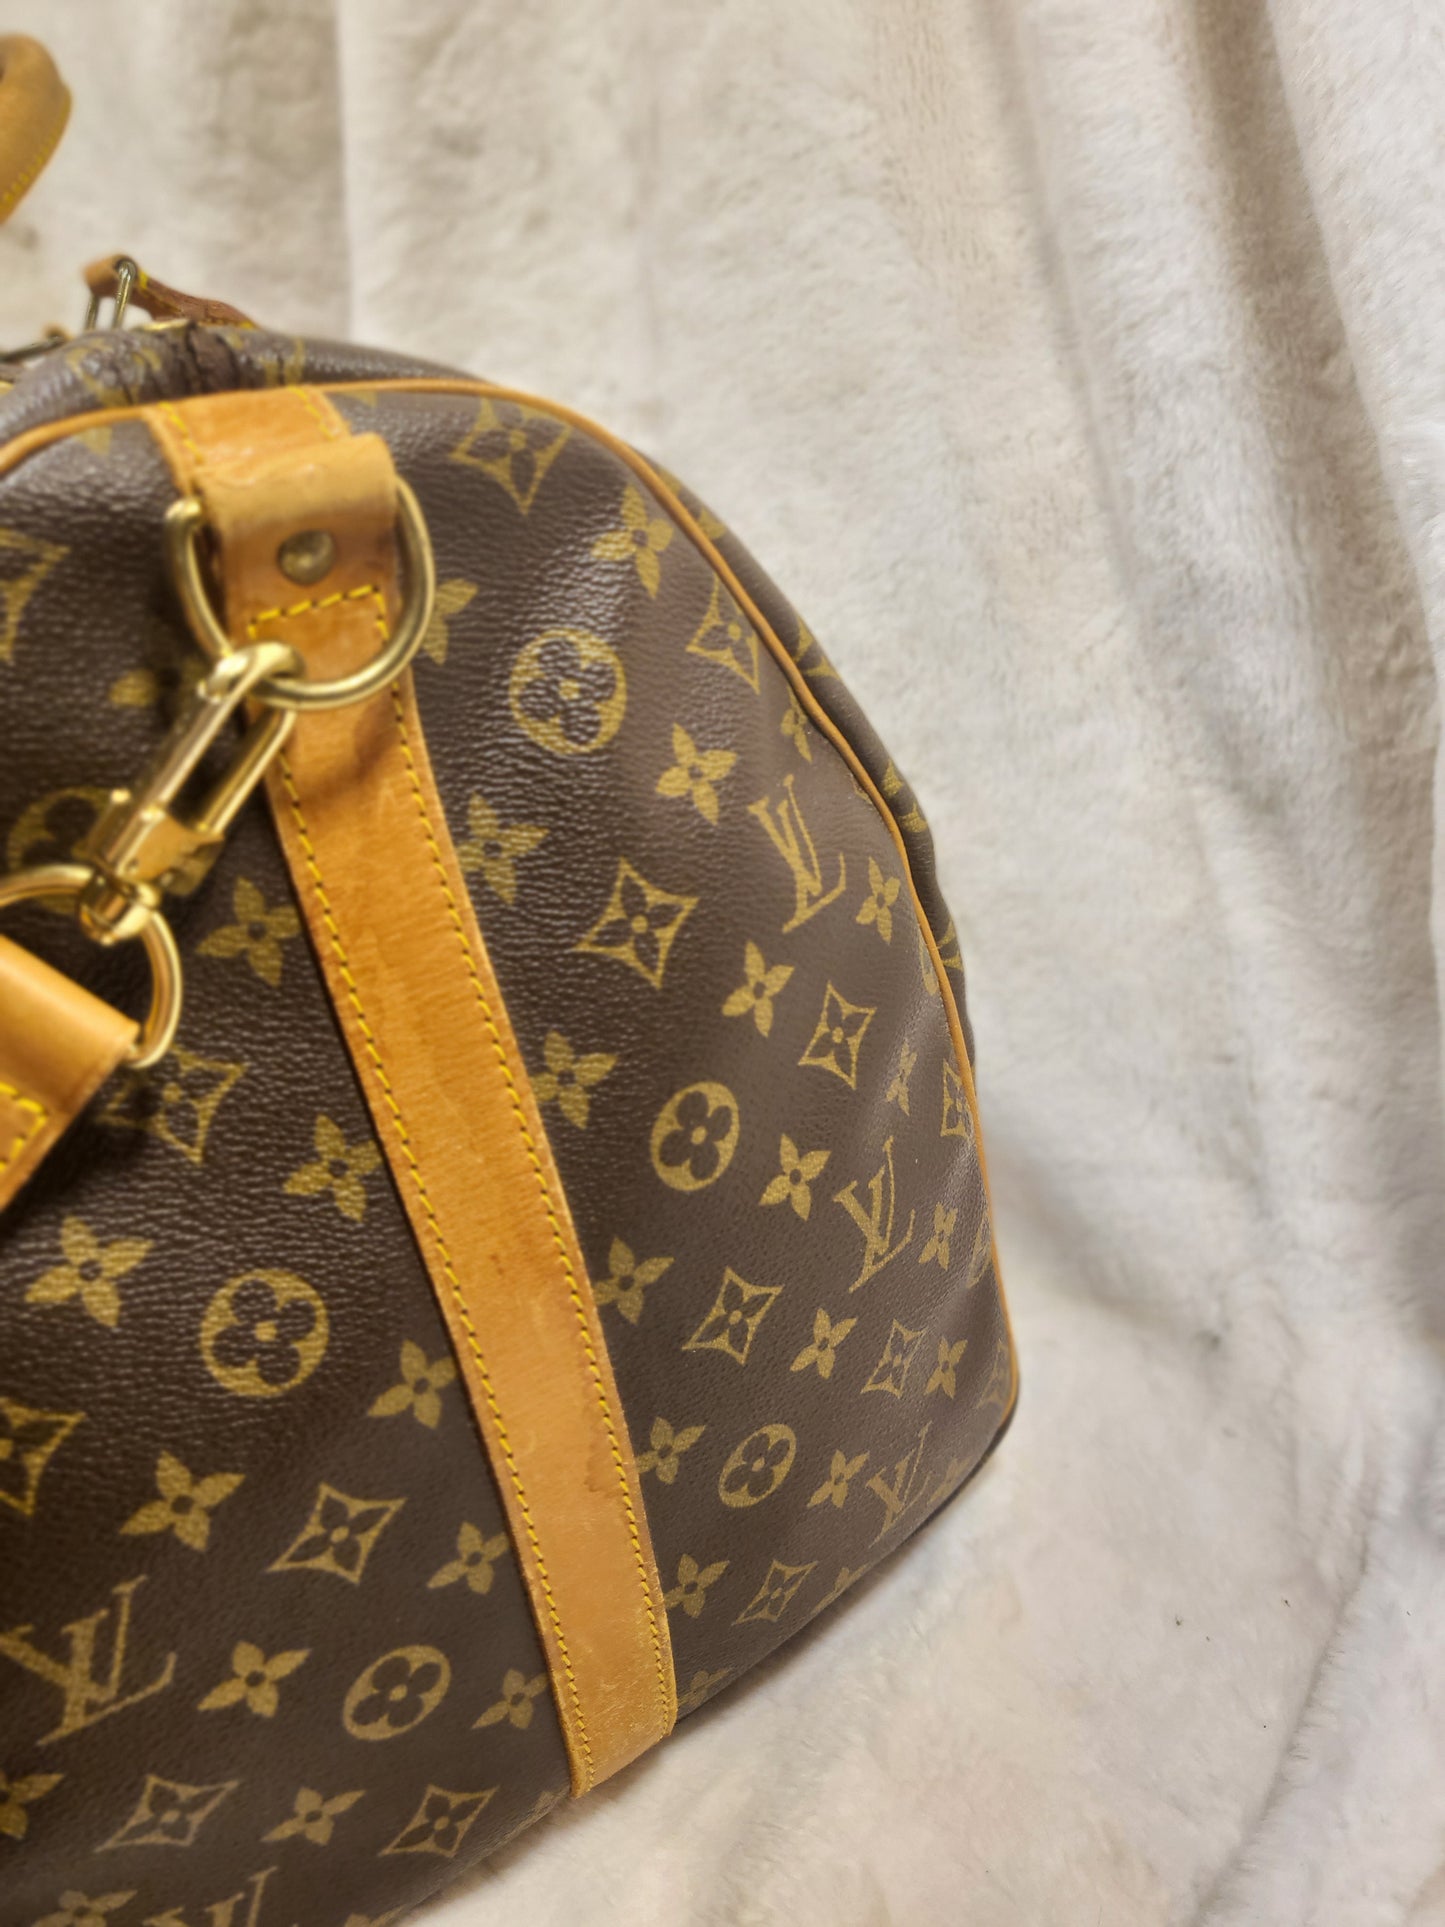 Authentic pre-owned Louis Vuitton Keepall 55 bandoliere